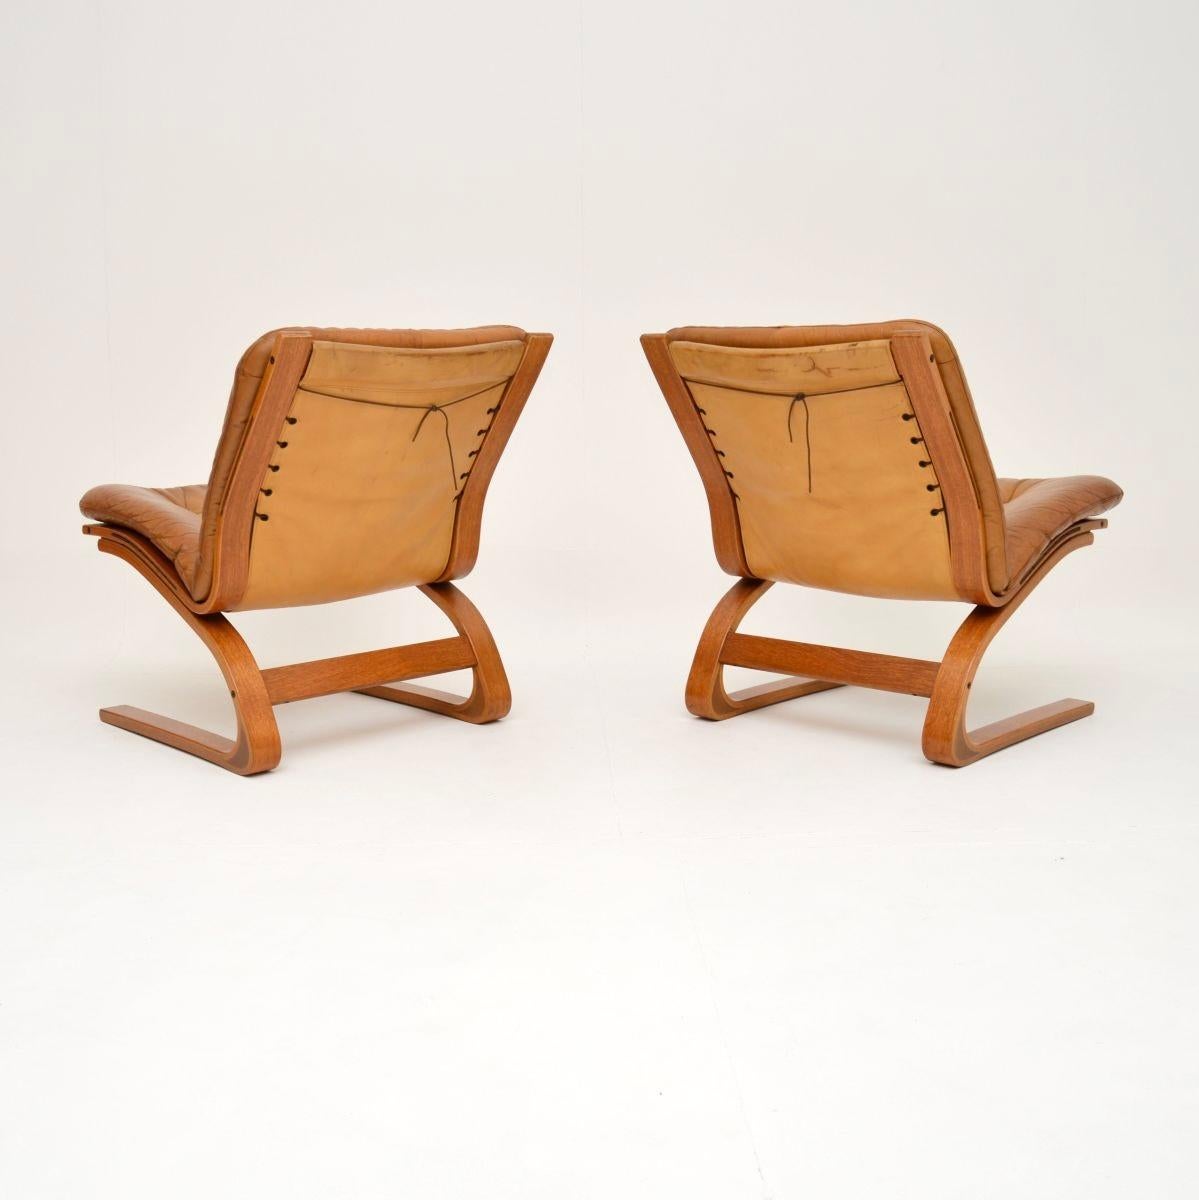 Norwegian Pair of Vintage Leather Kengu Chairs by Elsa and Nordahl Solheim for Rykken For Sale